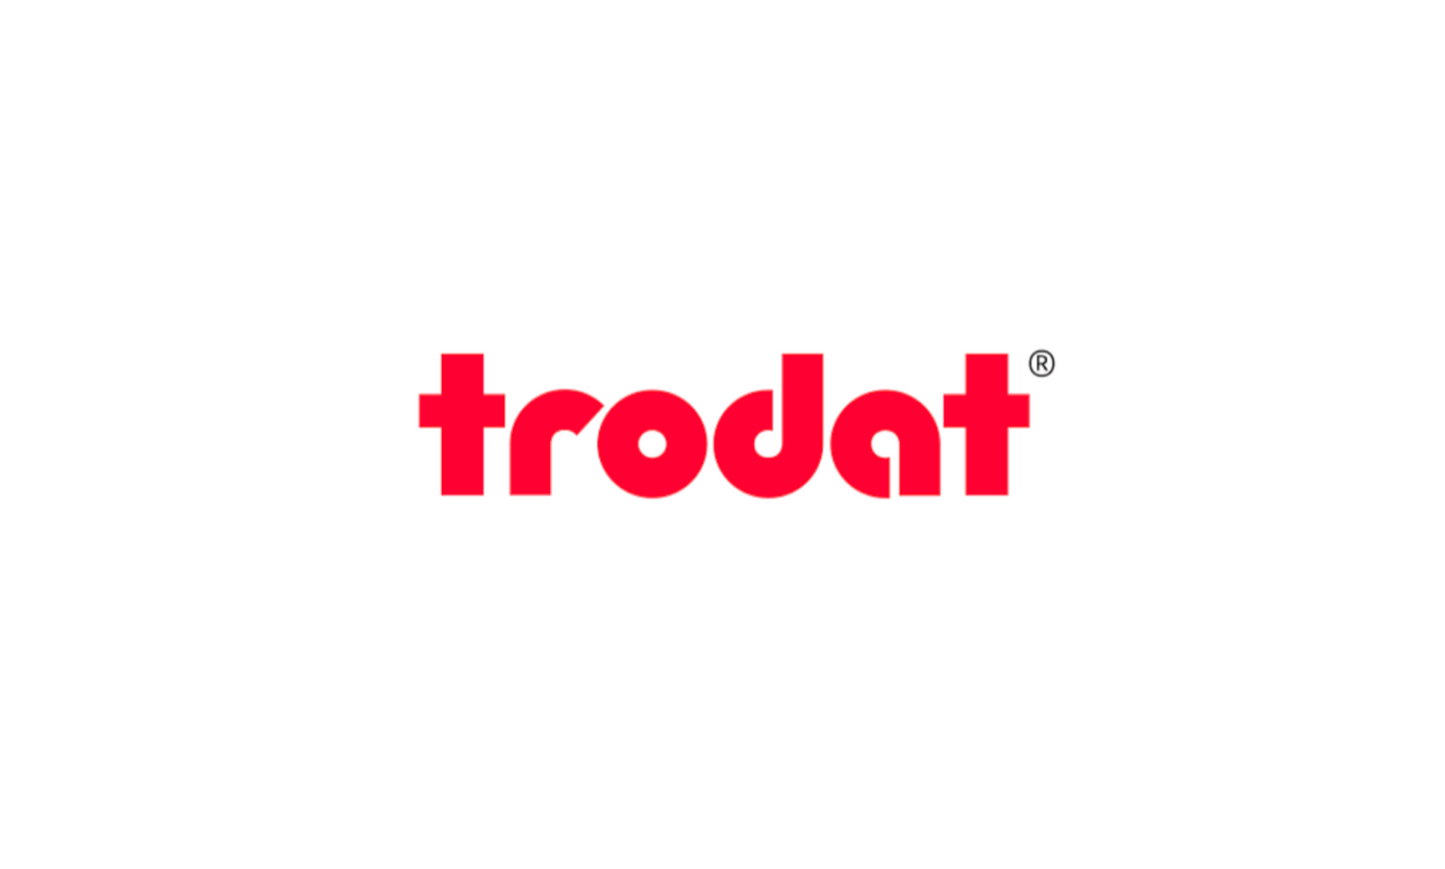 Trodat Pocket Printy Text 9511 all colours and display included | Trodat